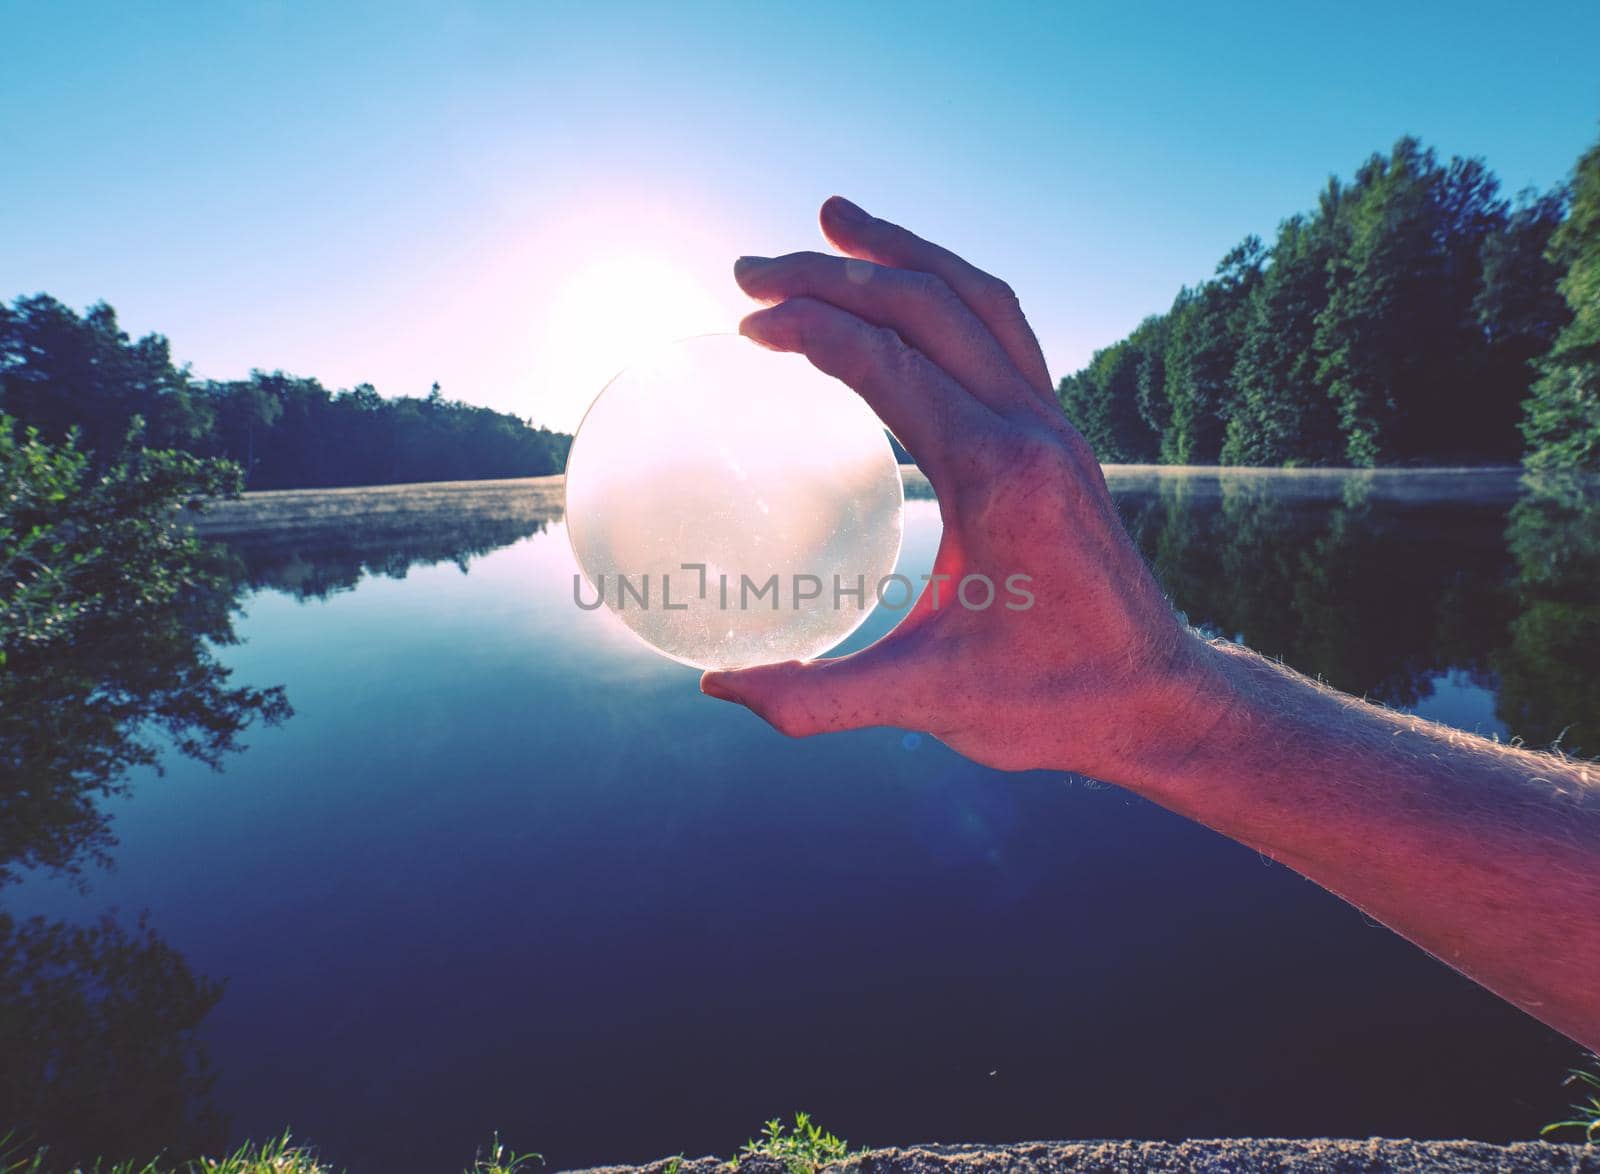 Hand hold glass lens or ball uniquely reflects world by rdonar2